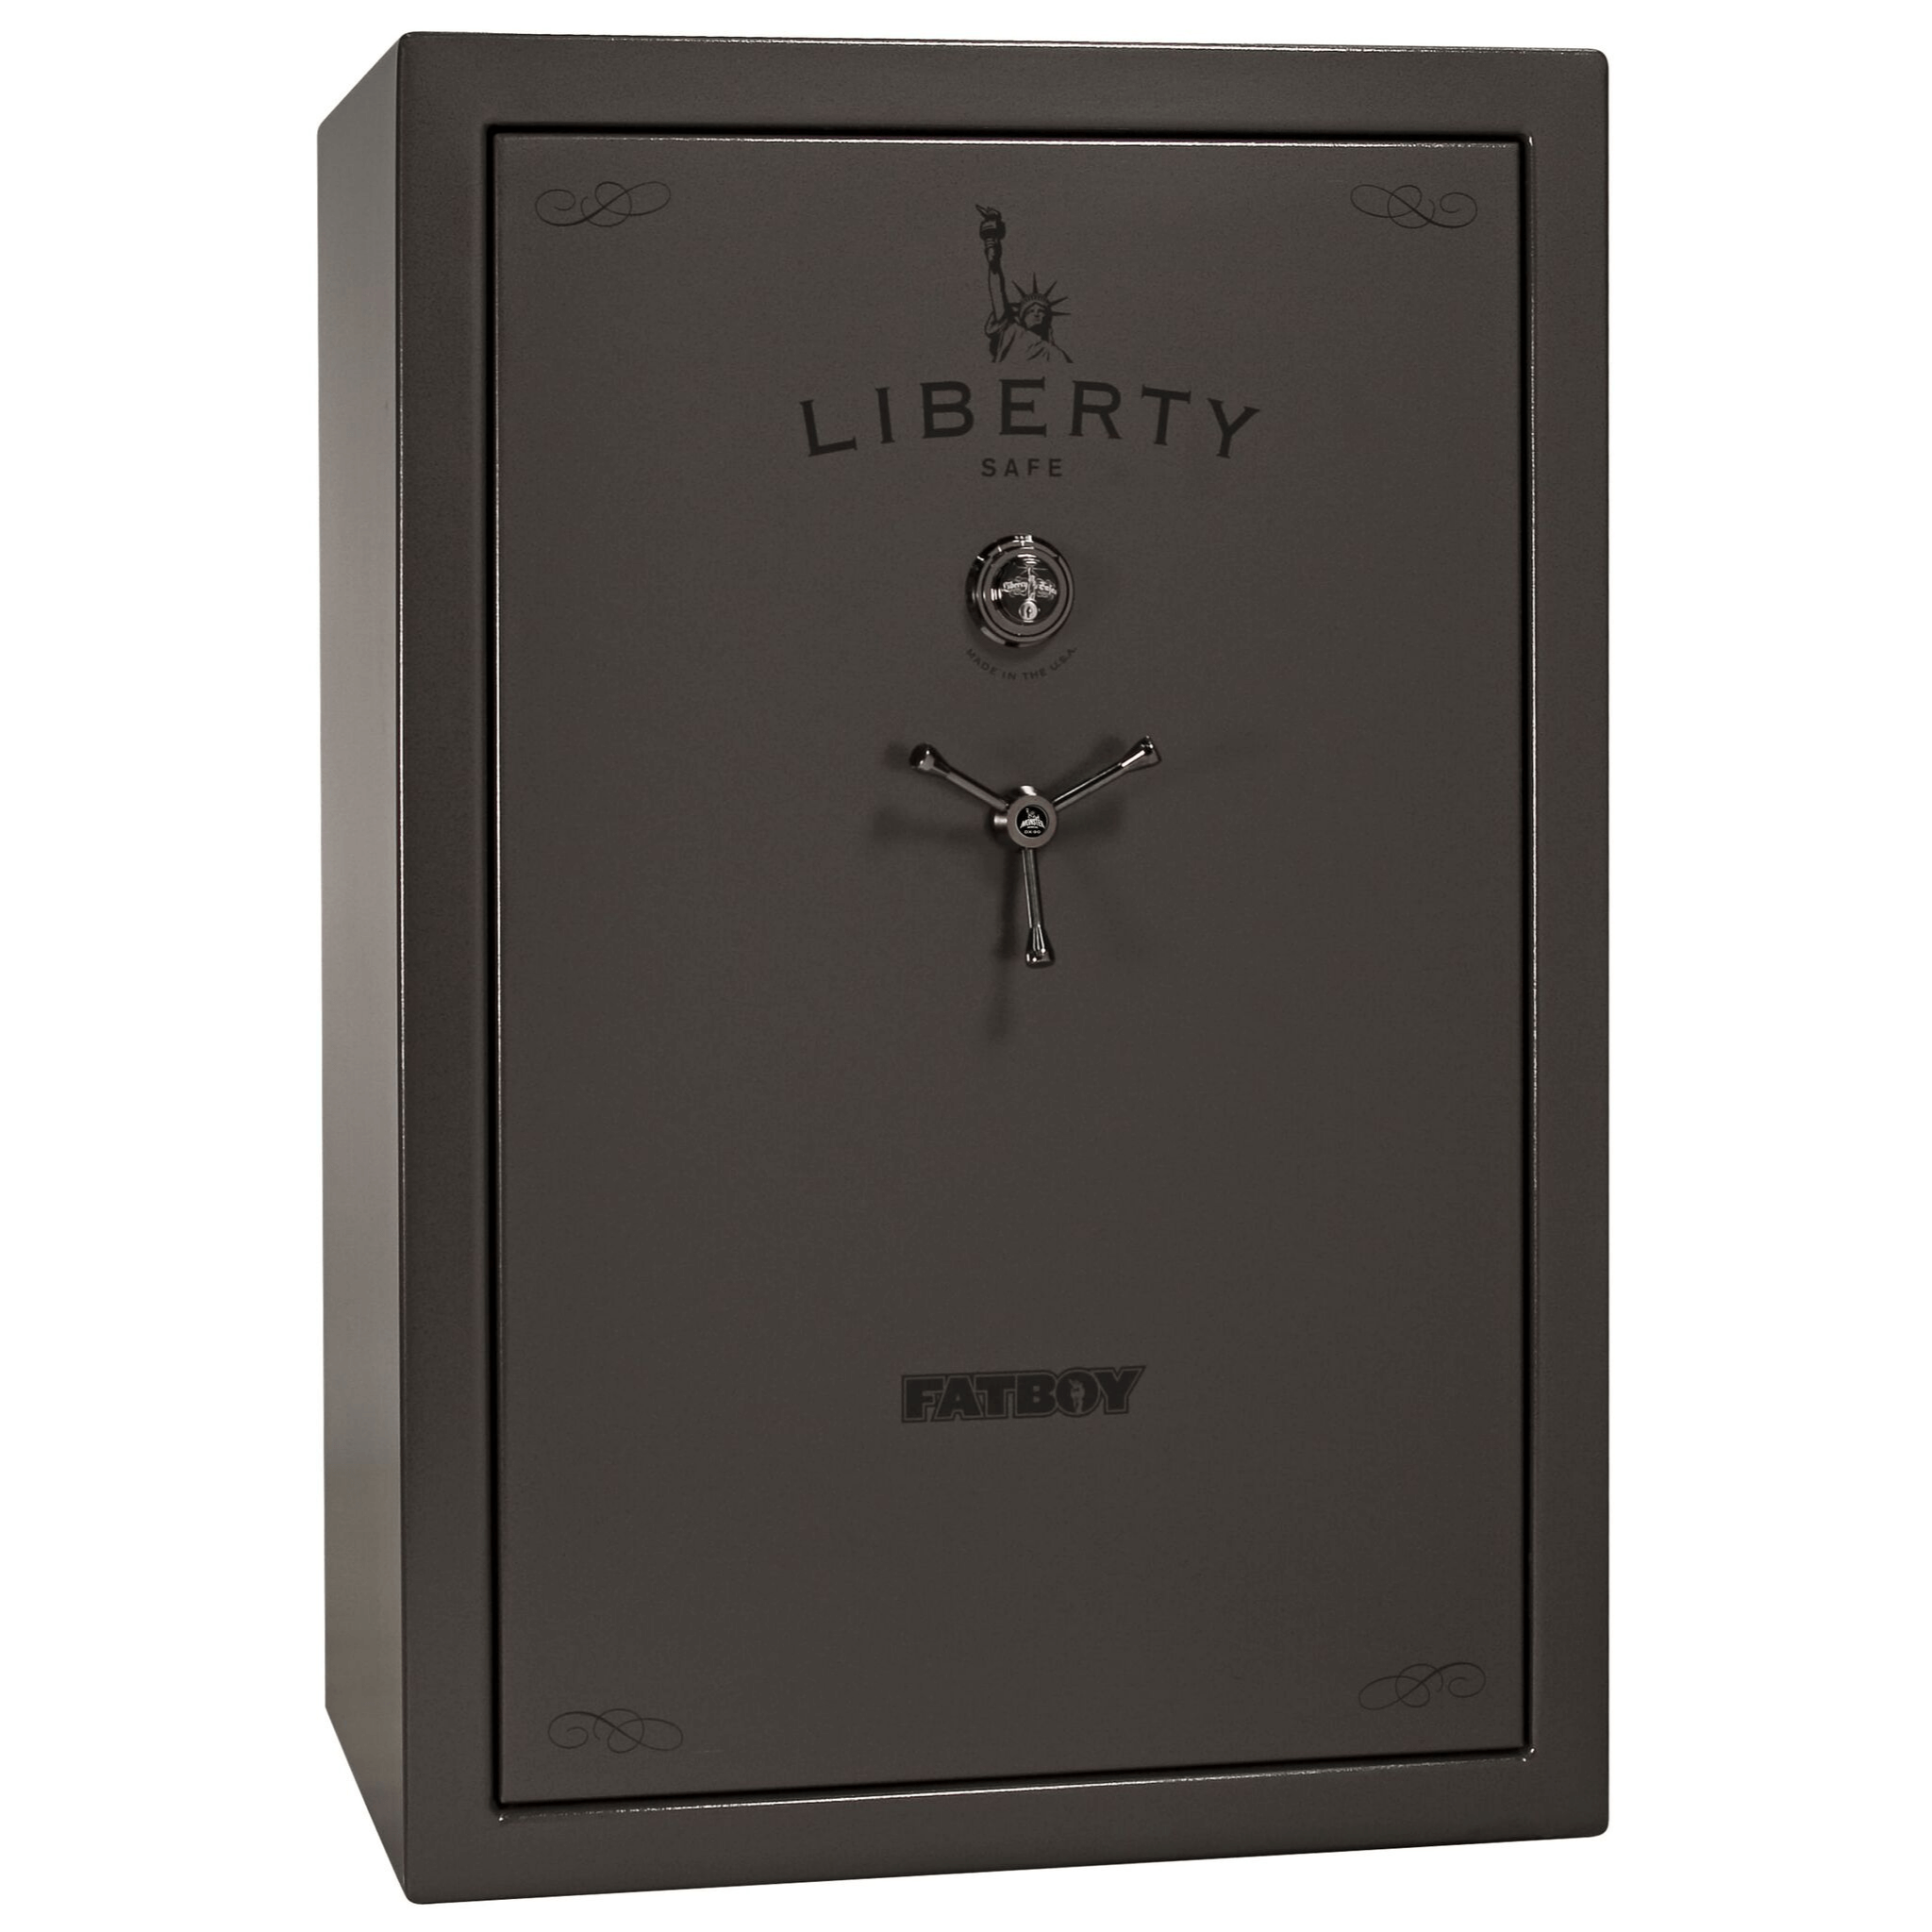 Fatboy Series | Level 4 Security | 90 Minute Fire Protection | 64XT | Dimensions: 60.5"(H) x 42"(W) x 32"(D) | Extreme 6 in 1 Flex Interior | Gray Marble | Mechanical Lock, photo 21